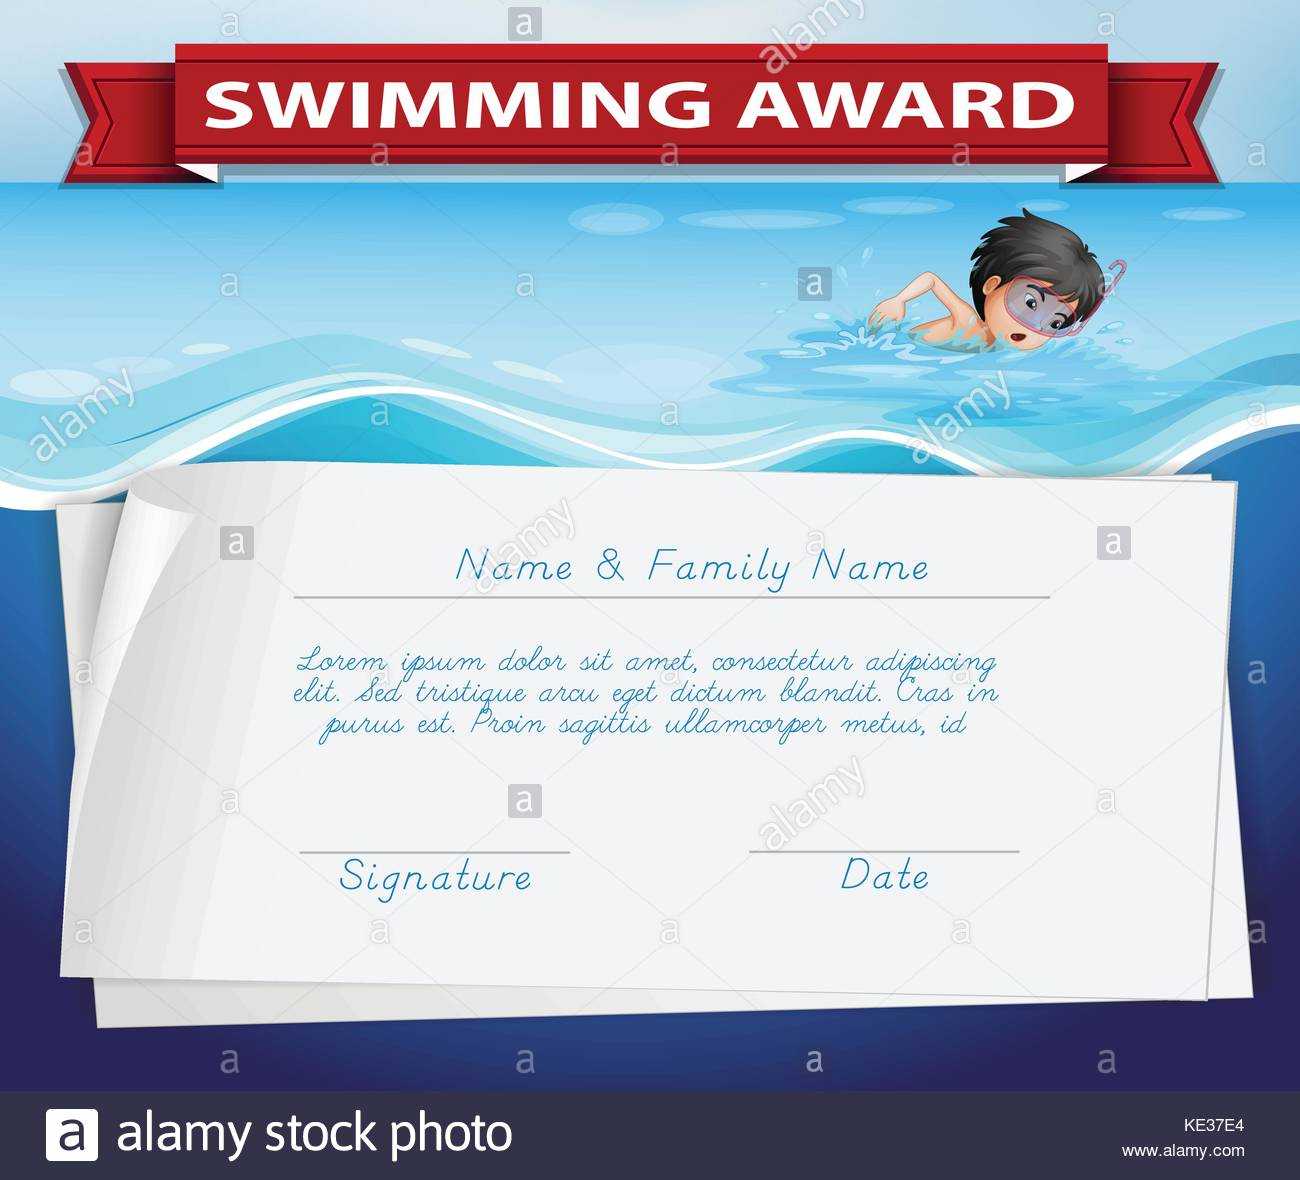 Template Of Certificate For Swimming Award Illustration Pertaining To Swimming Award Certificate Template